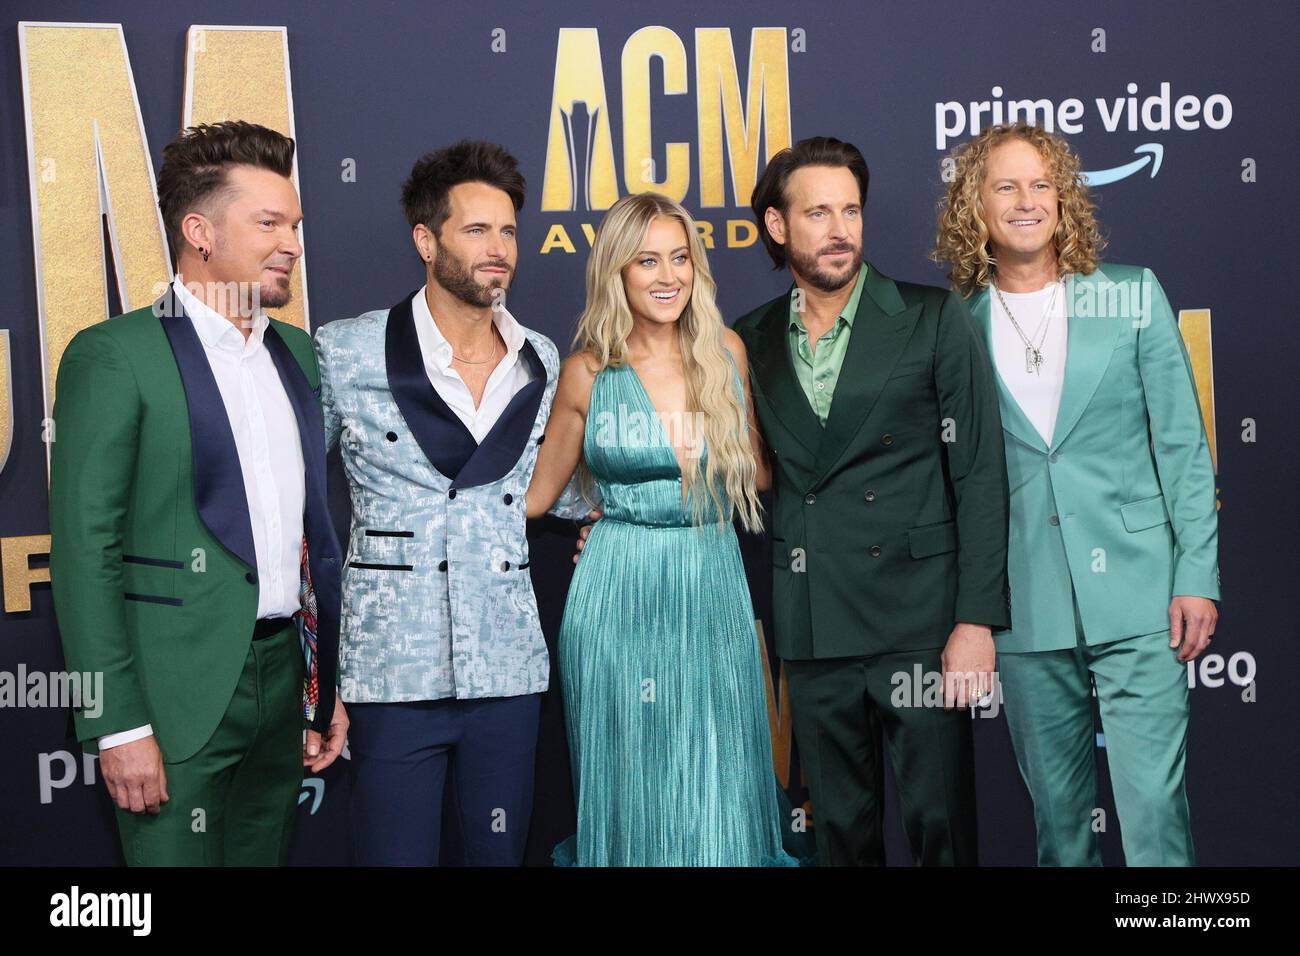 Las Vegas, NV, USA. 7th Mar, 2022. Parmalee, Brooke Eden at arrivals for 57th Academy of Country Music (ACM) Awards - Arrivals 1, Allegiant Stadium, Las Vegas, NV March 7, 2022. Credit: JA/Everett Collection/Alamy Live News Stock Photo